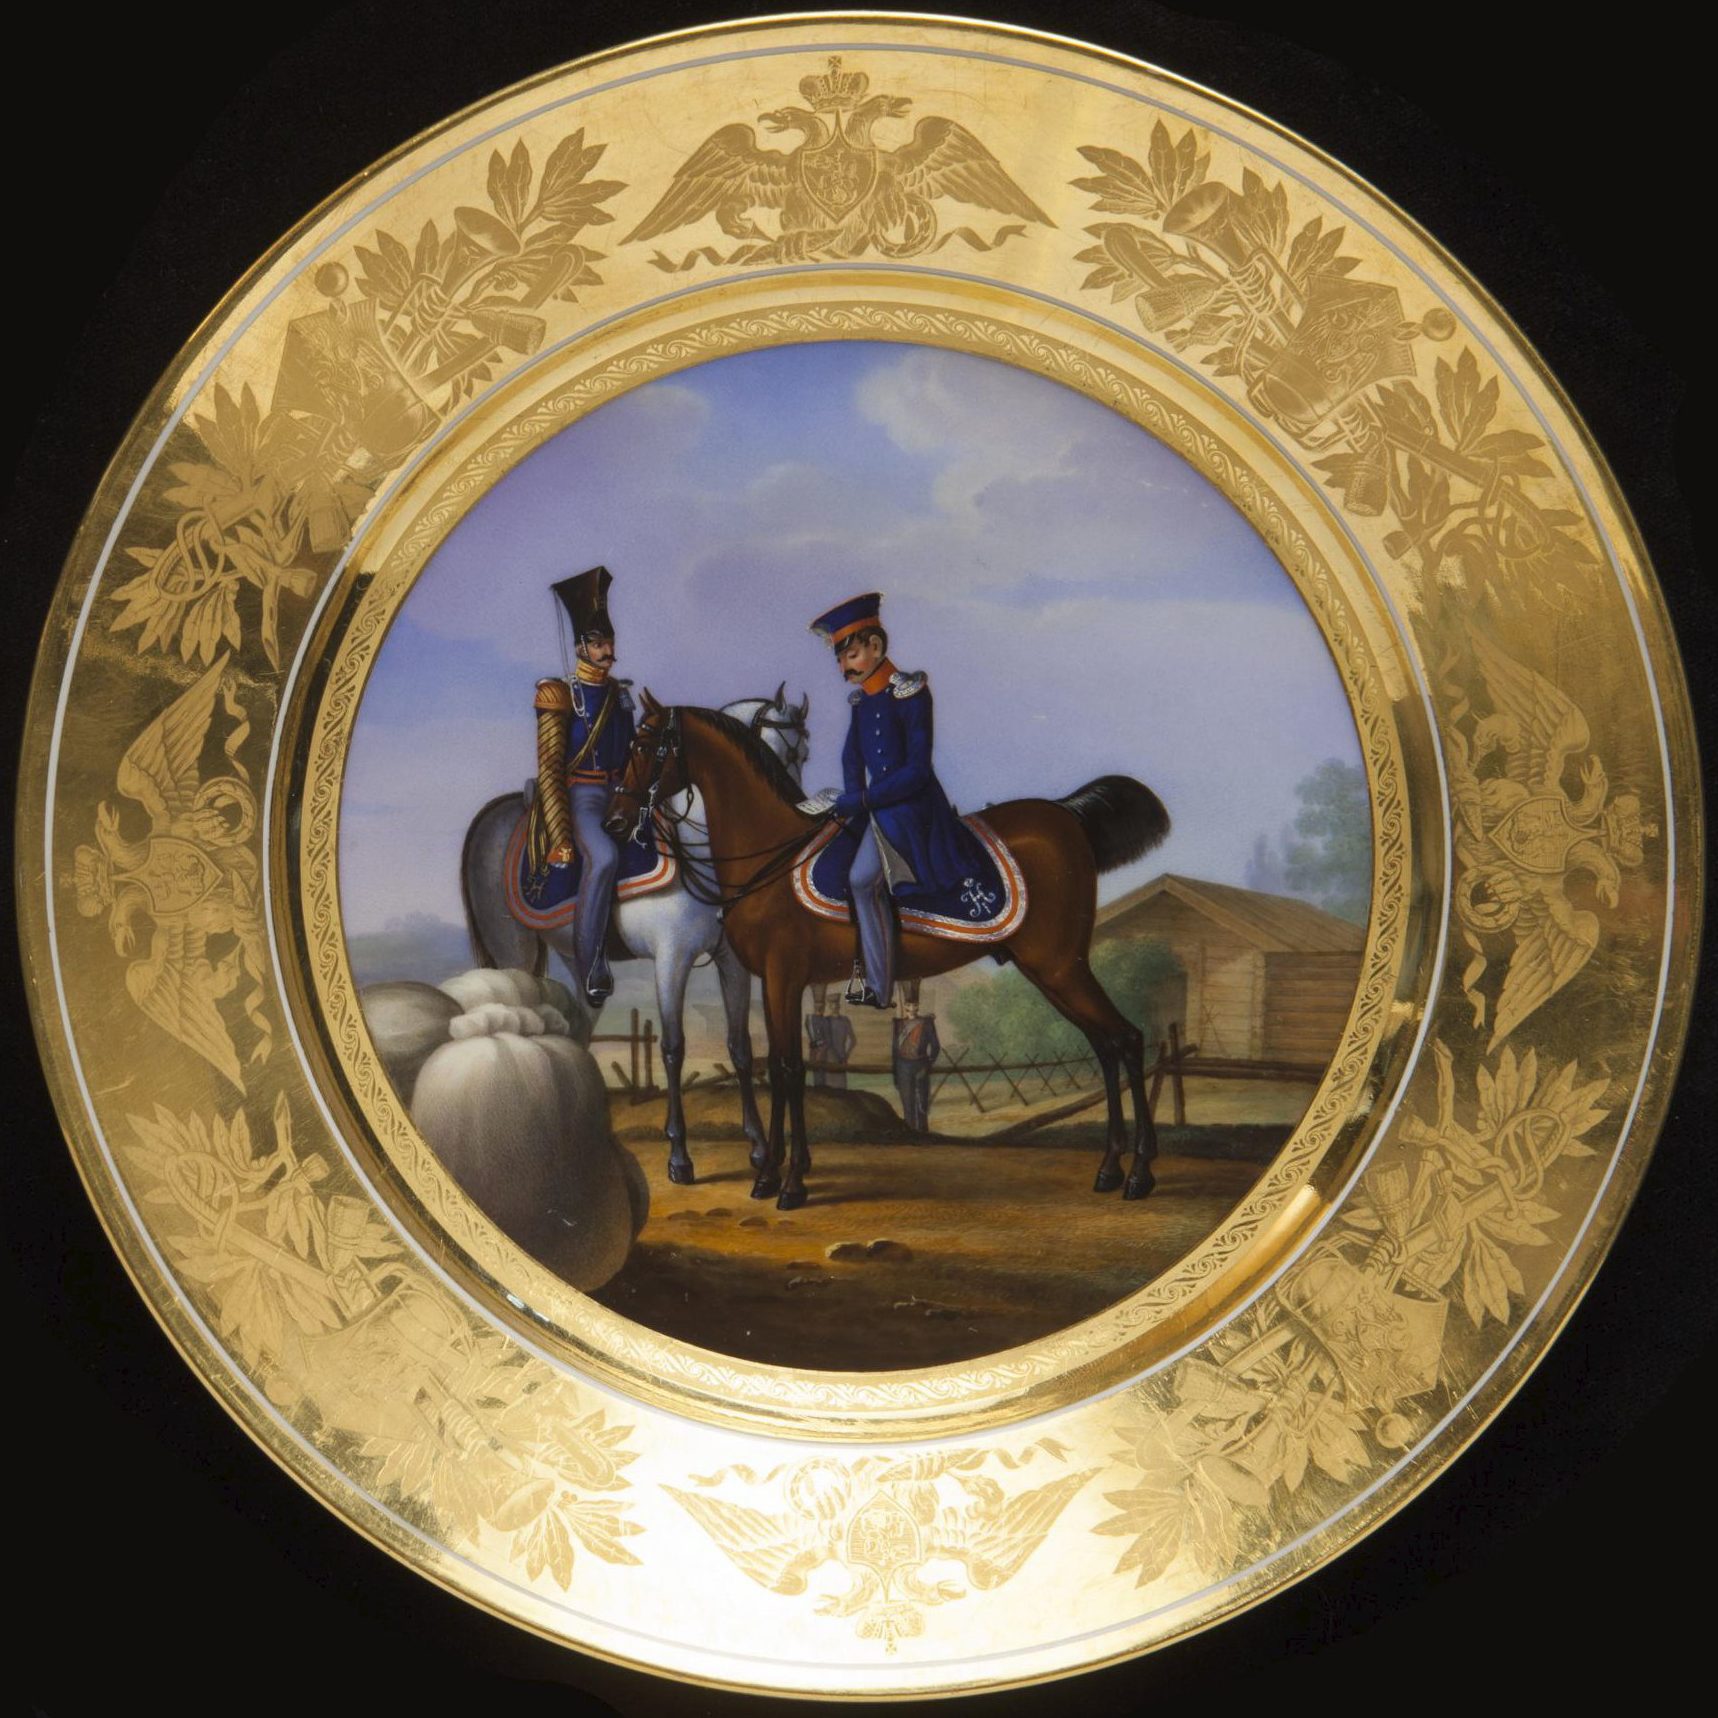 Russian Imperial Porcelain military plate depicting Uhlans